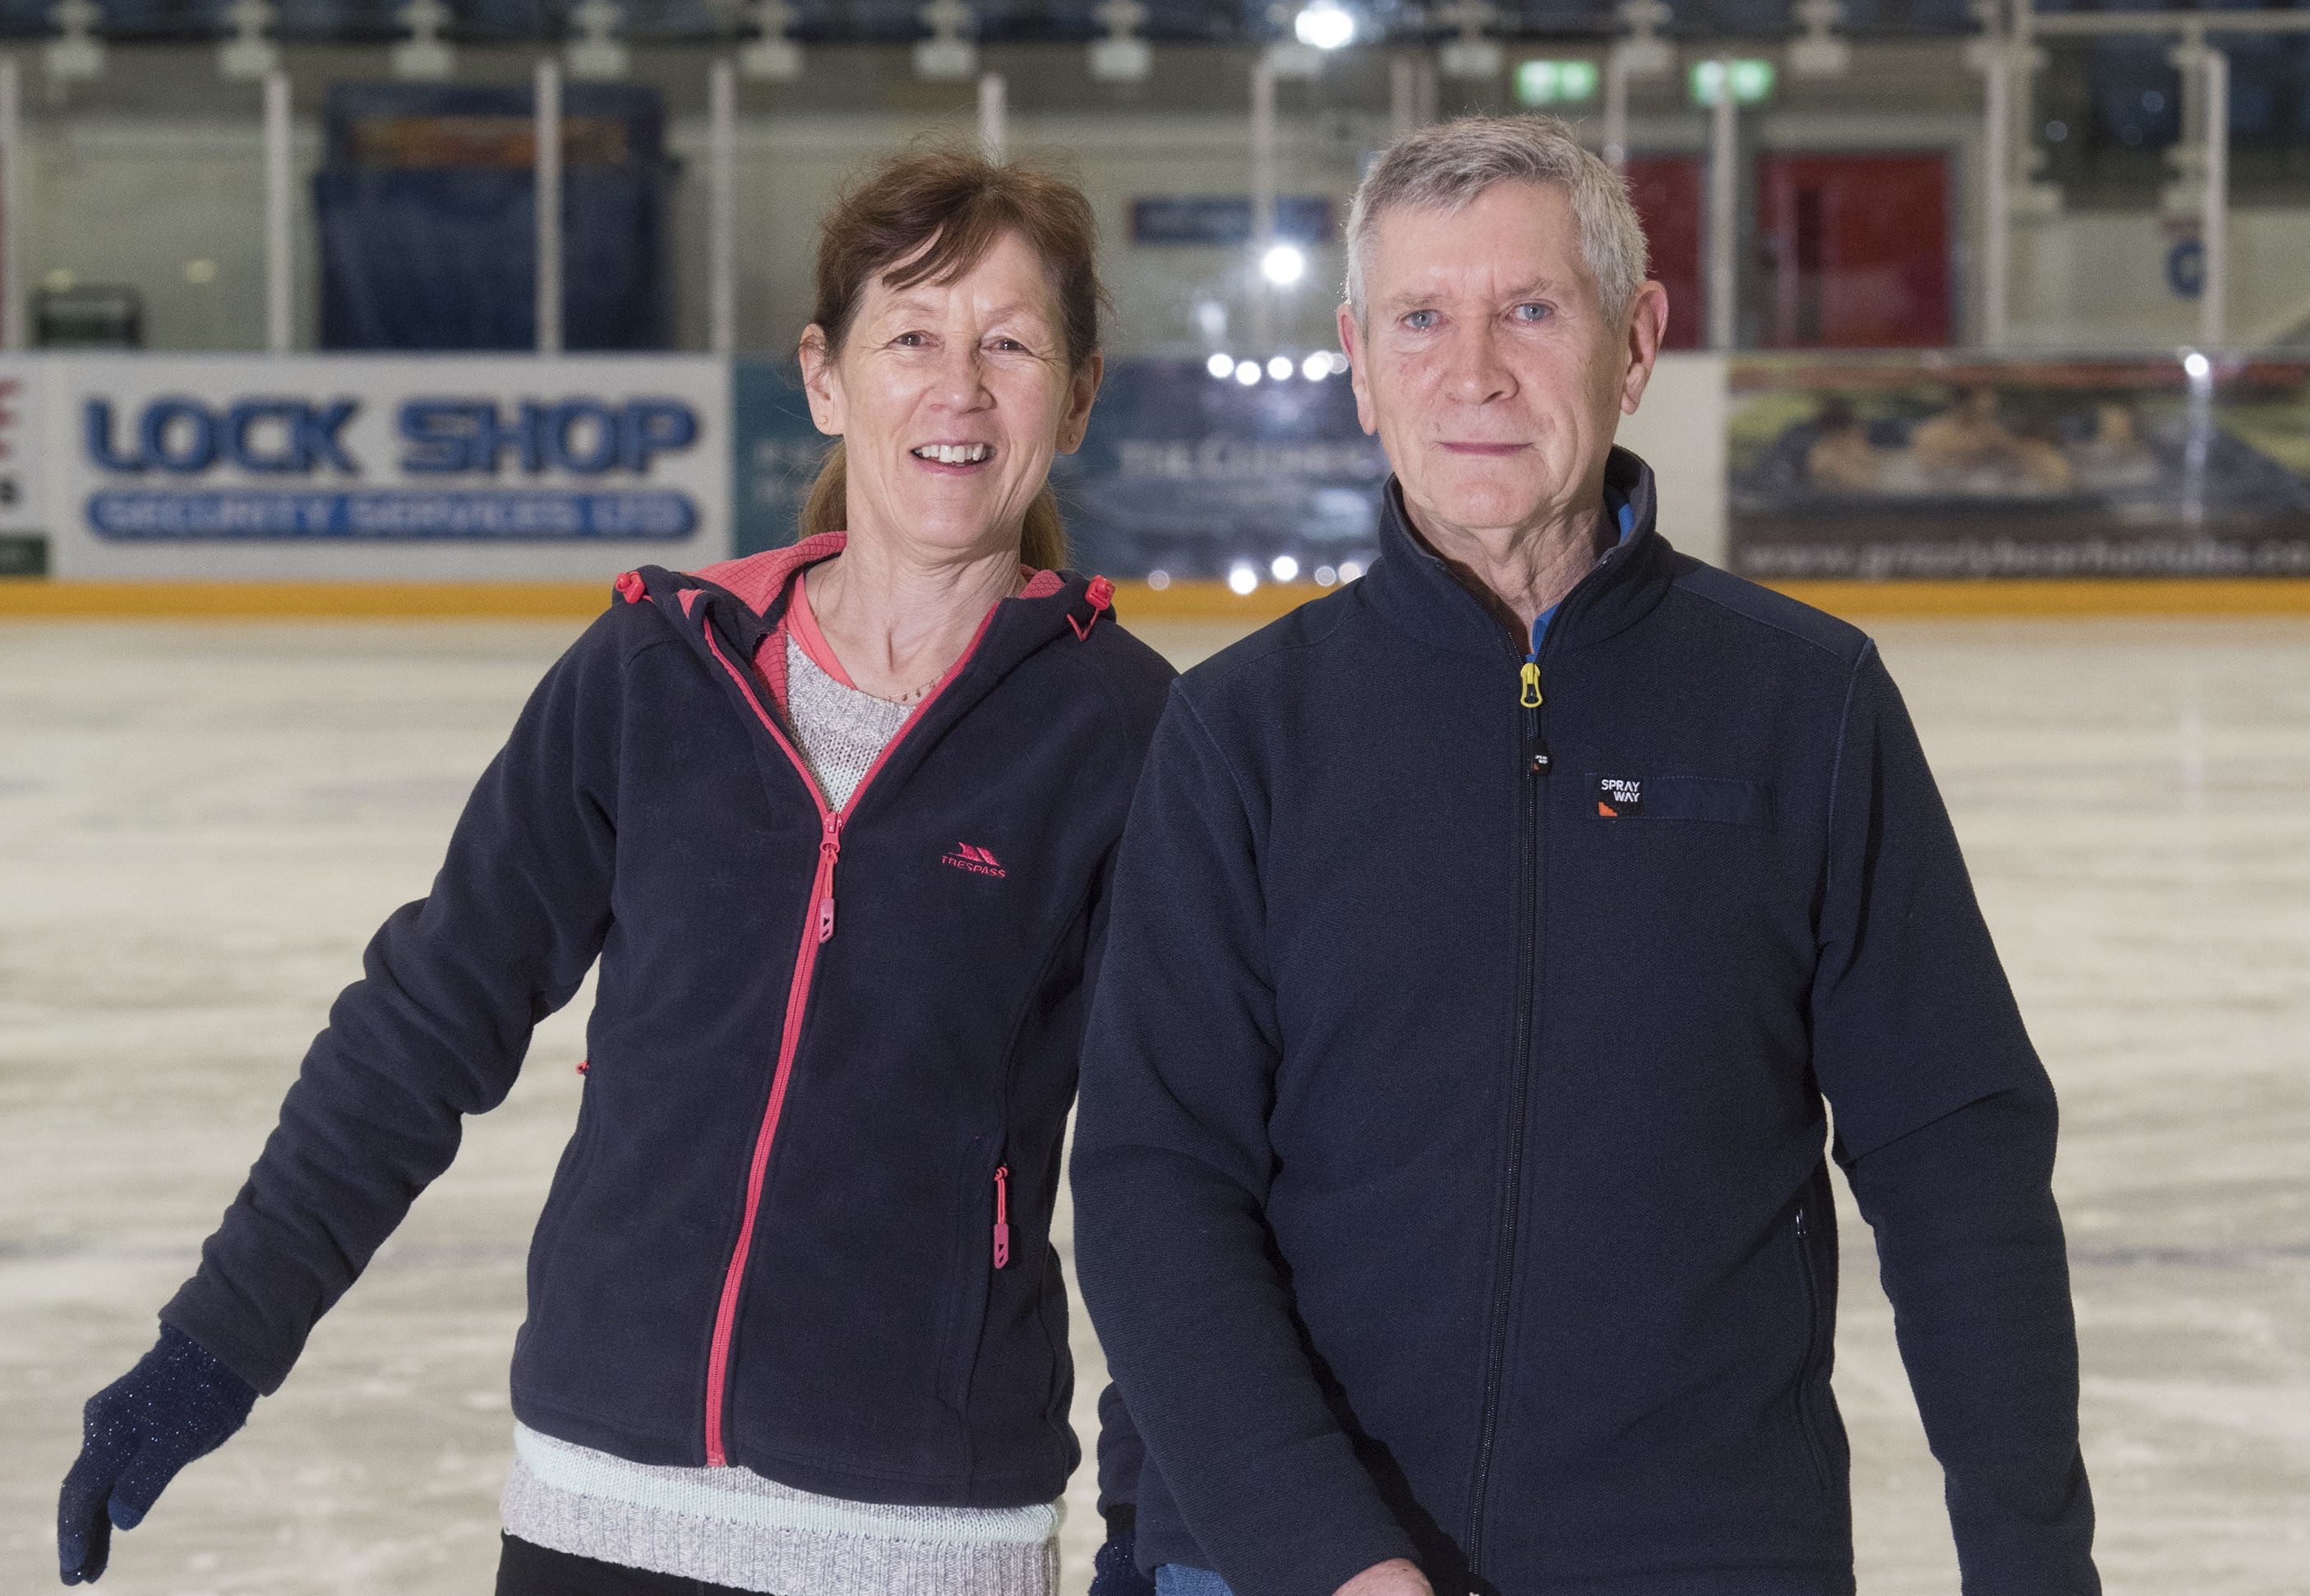 Learn to skate class members Will Rowbottom and Ann Reed (Alan Richardson/ Pix-AR.co.uk)